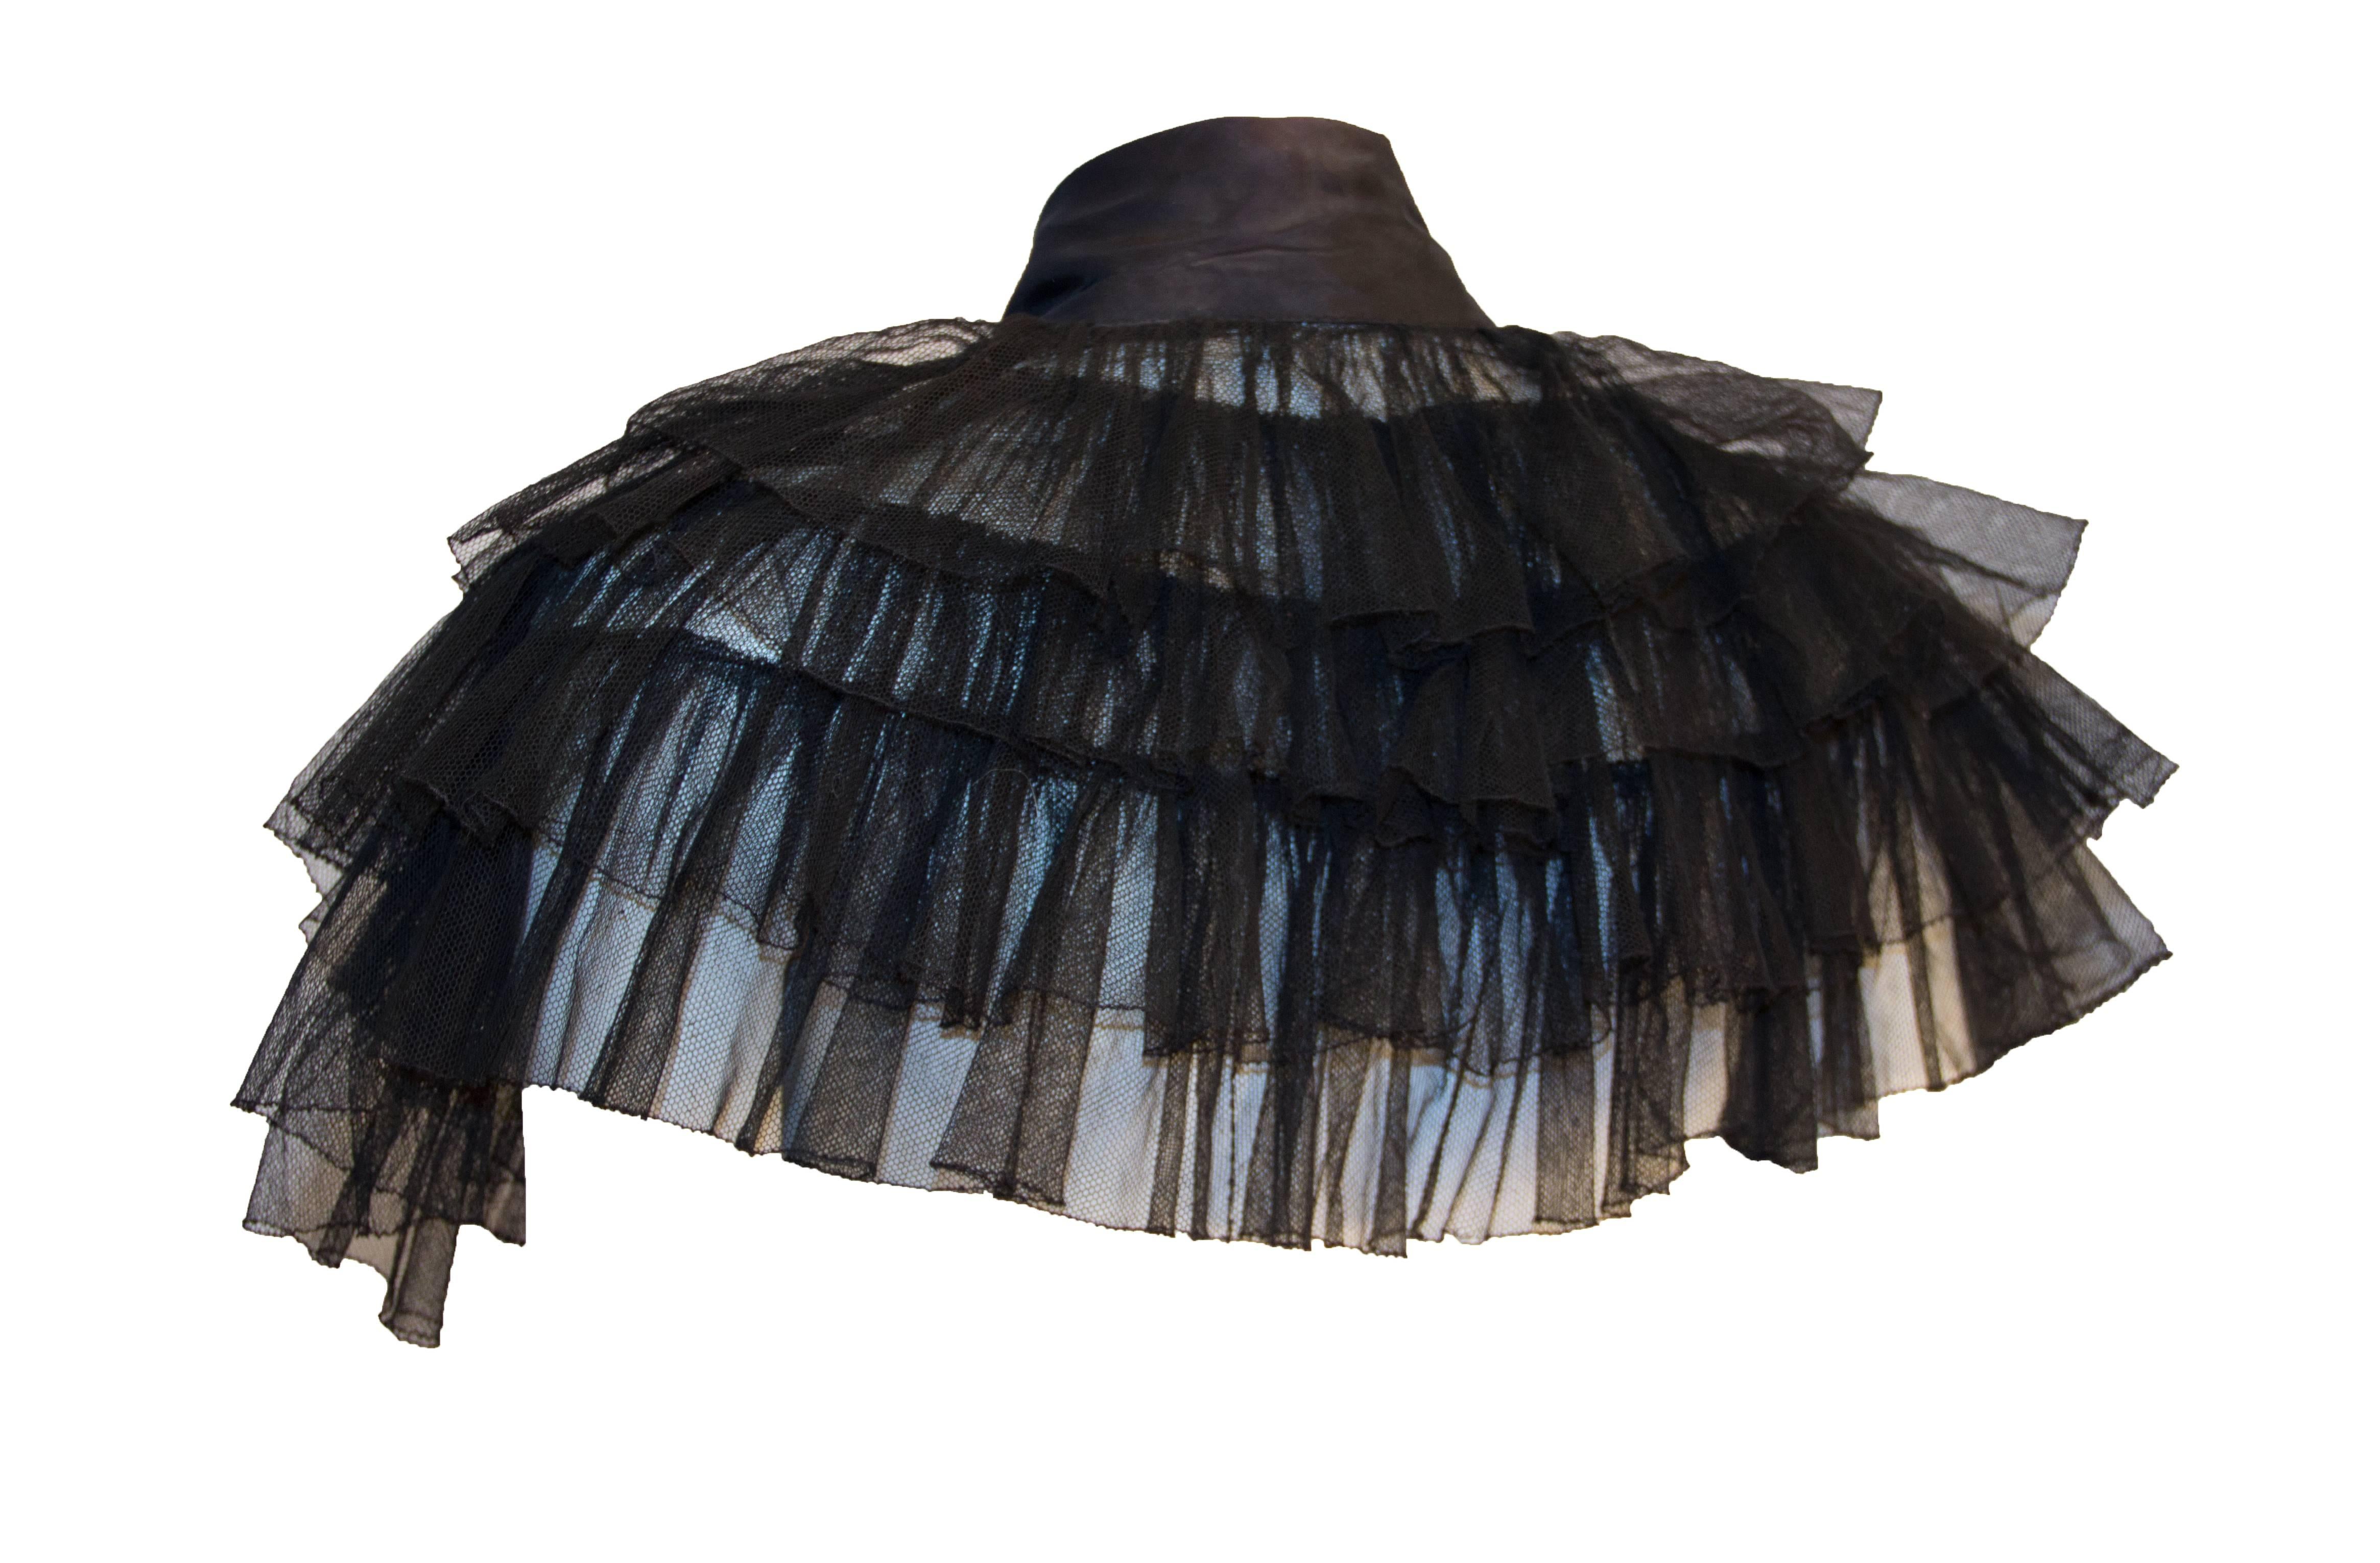 30s black mesh tiered ruffled capelet. 4 tiers of ruffles. Taffeta neck sash can be tied in a bow